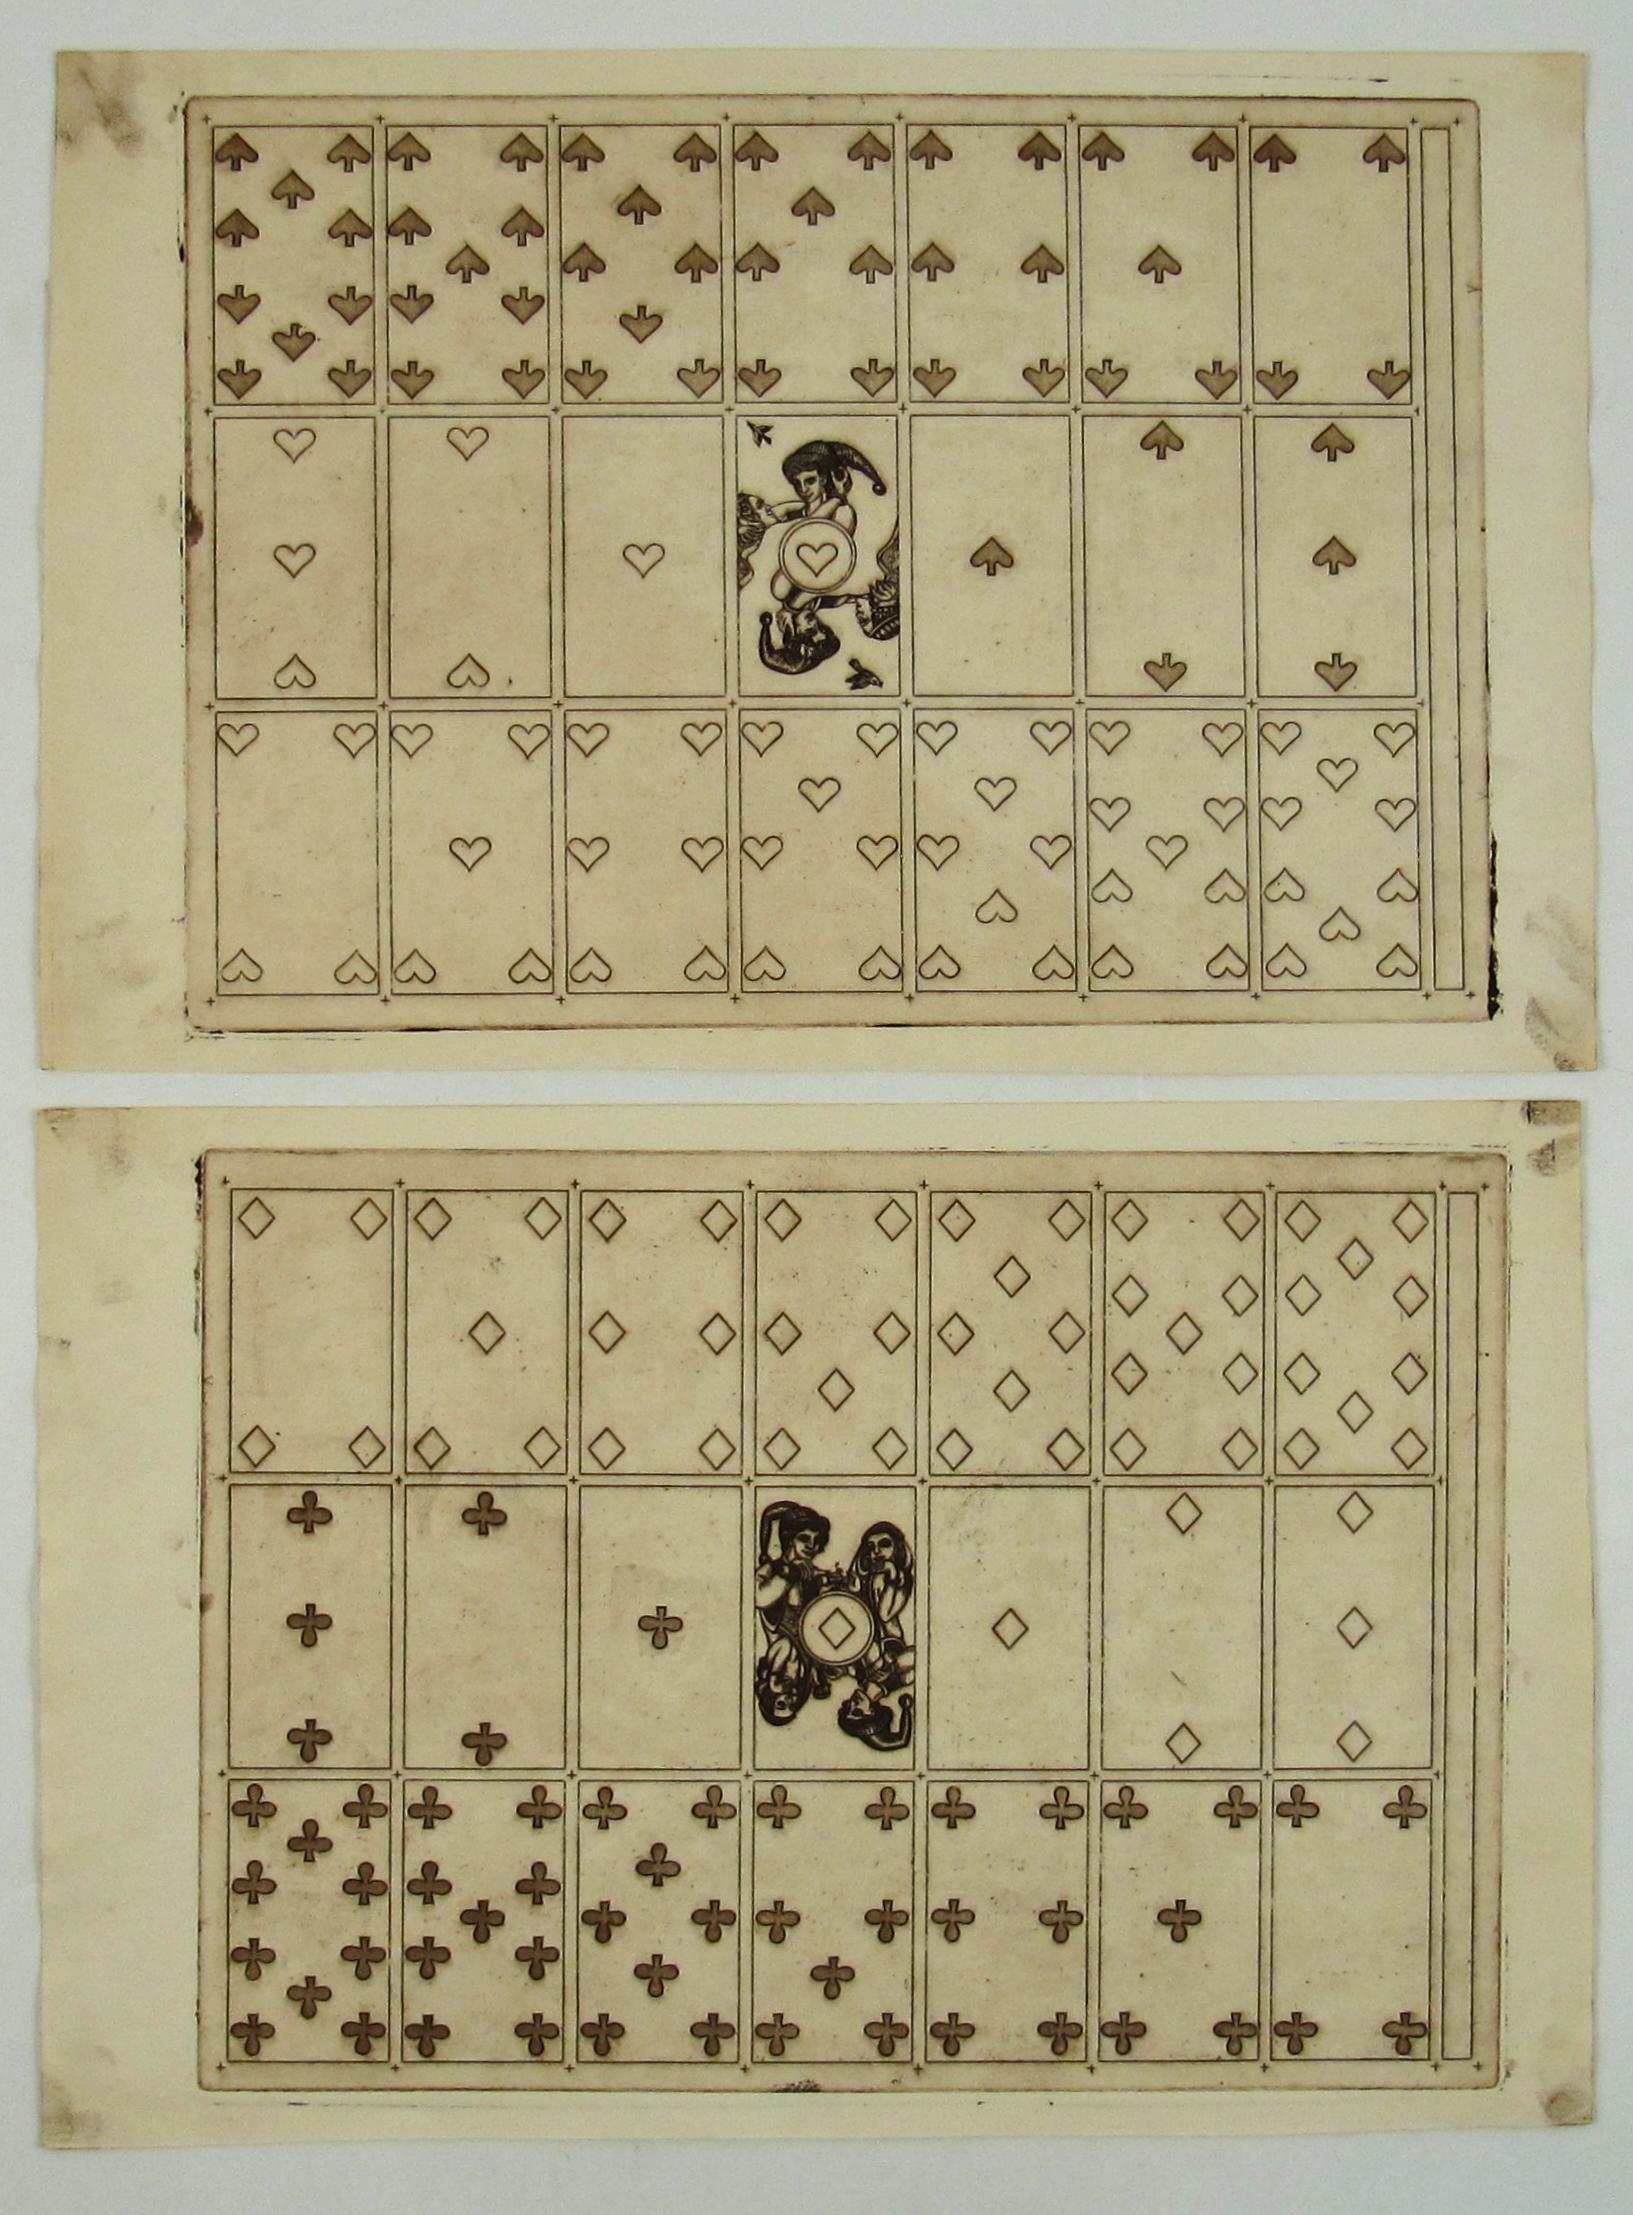 Karl Alexander Gerich Figurative Print - Merry Andrew No. 30, 1989 by Karl Gerich of Bath - Two Playing Card Print Sheets